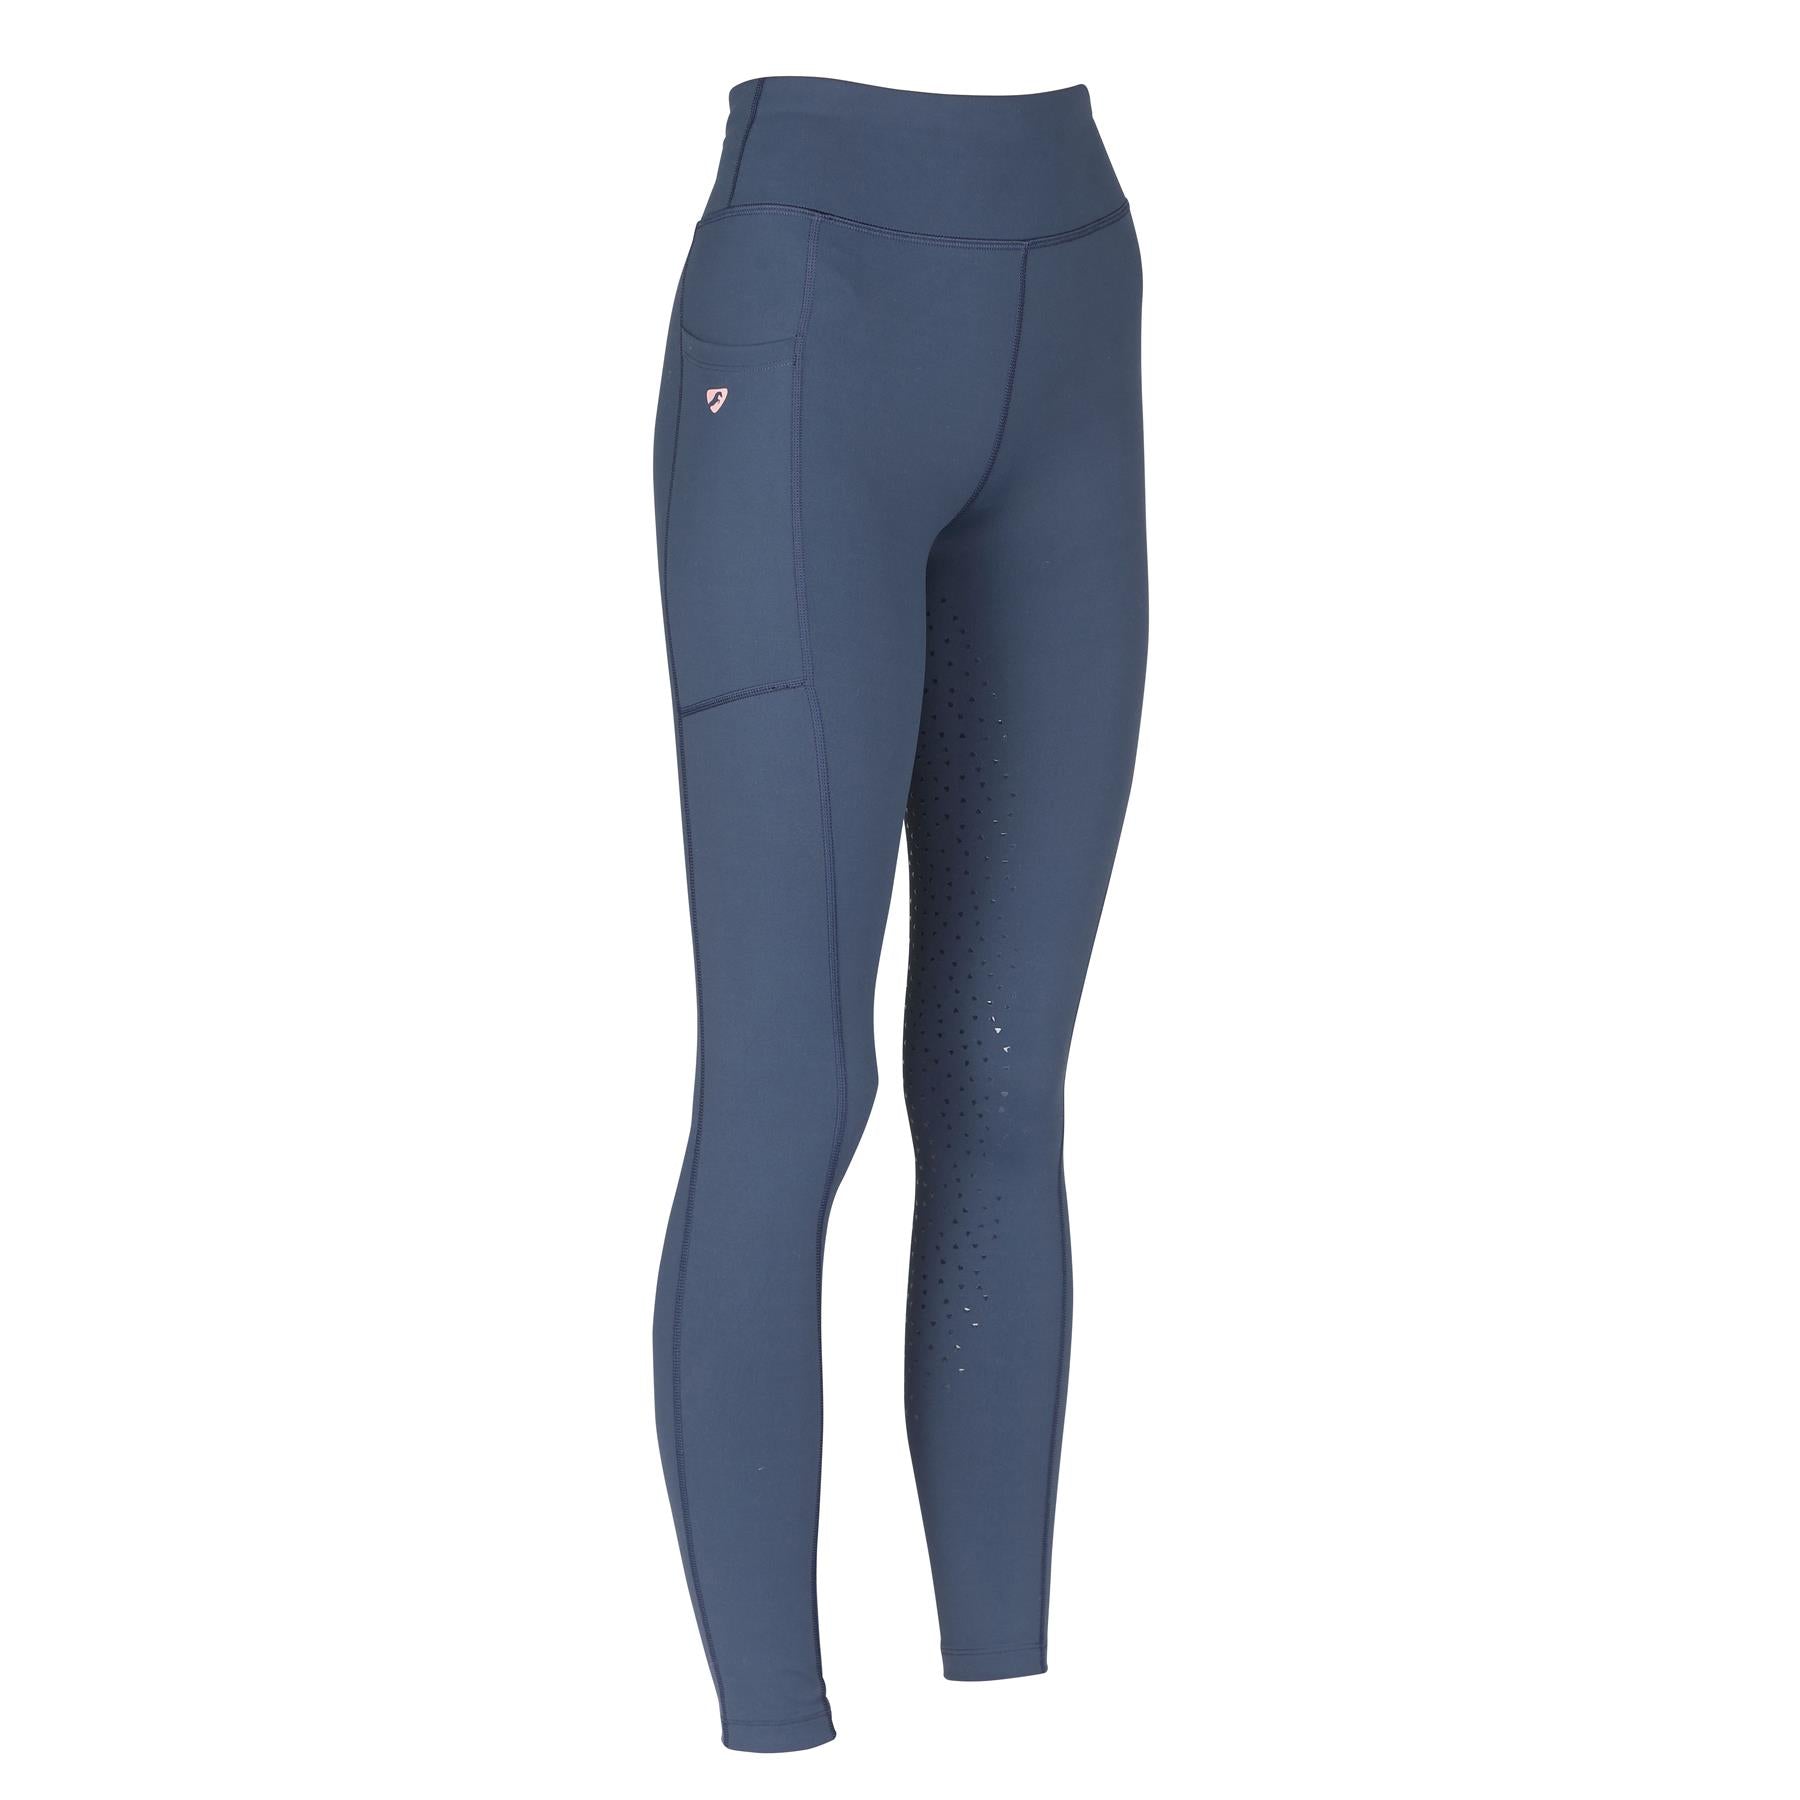 Aubrion Non-Stop Riding Tights - Just Horse Riders